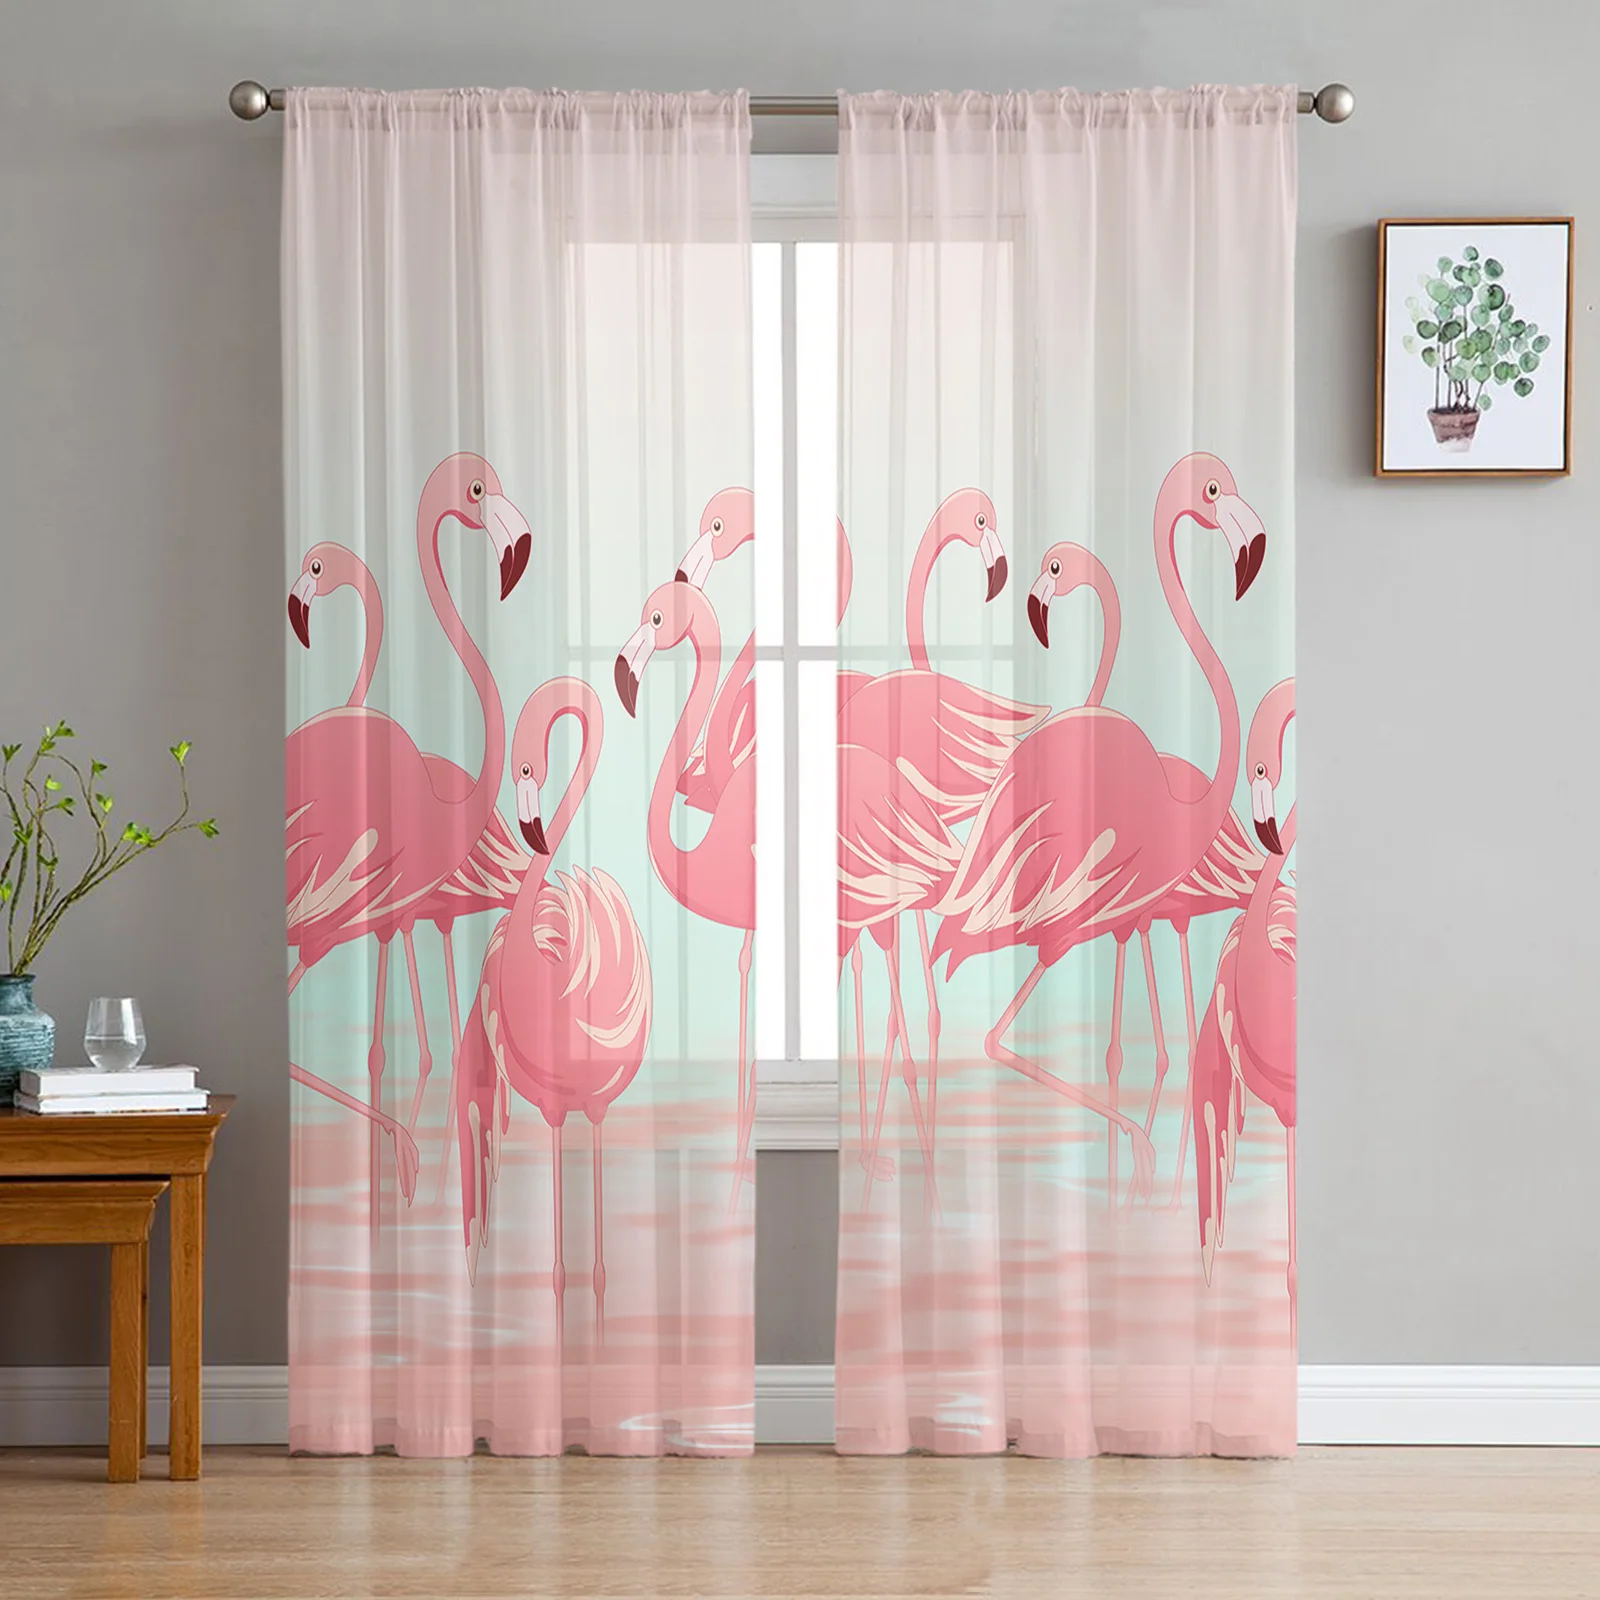 

Tropical Animal Flamingo Tulle Sheer Window Curtains for Living Room the Bedroom Modern Voile Organza Decorative Curtains Drapes